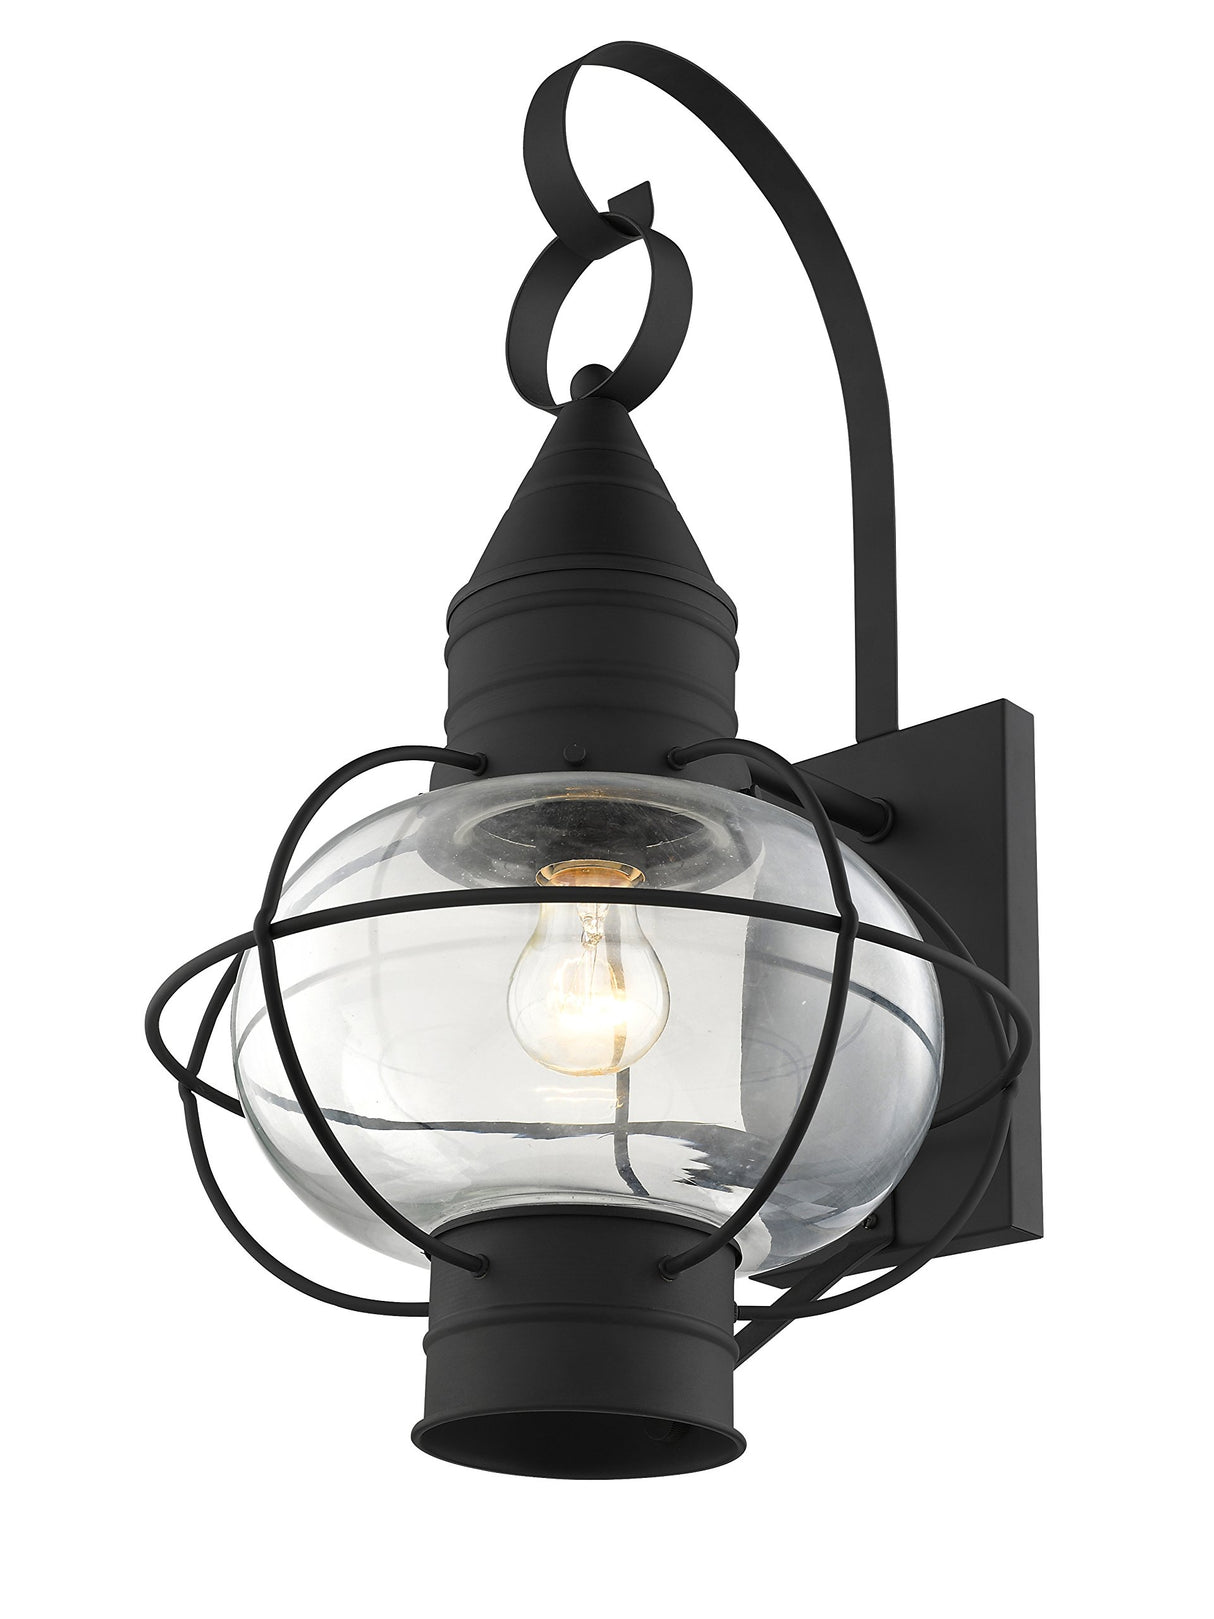 Livex Lighting 26904-04 Transitional One Light Outdoor Wall Lantern from Newburyport Collection in Black Finish